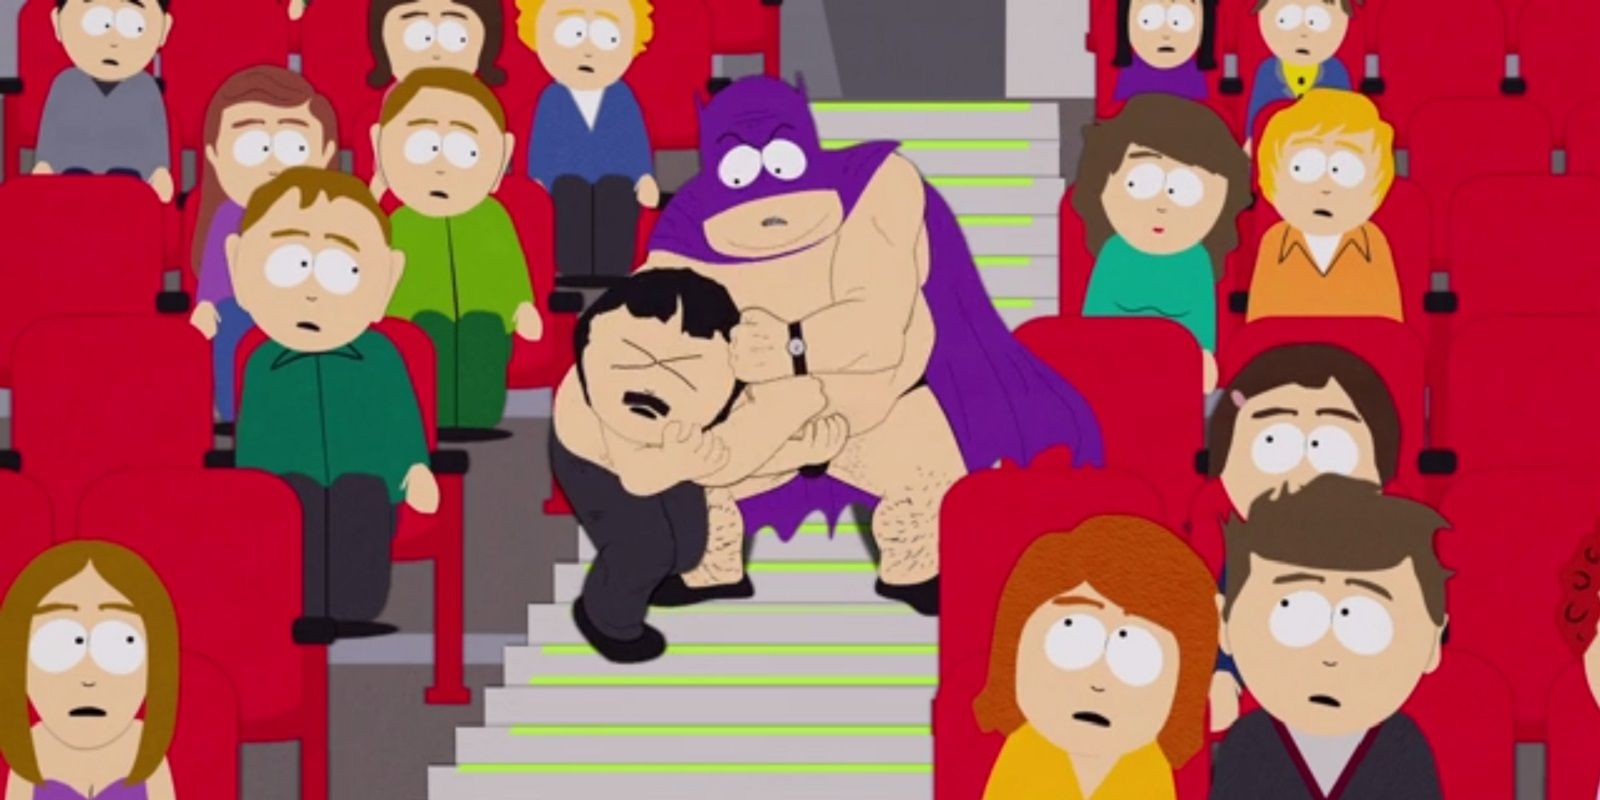 Randy Marsh Fights at Little League Baseball Game on South Park